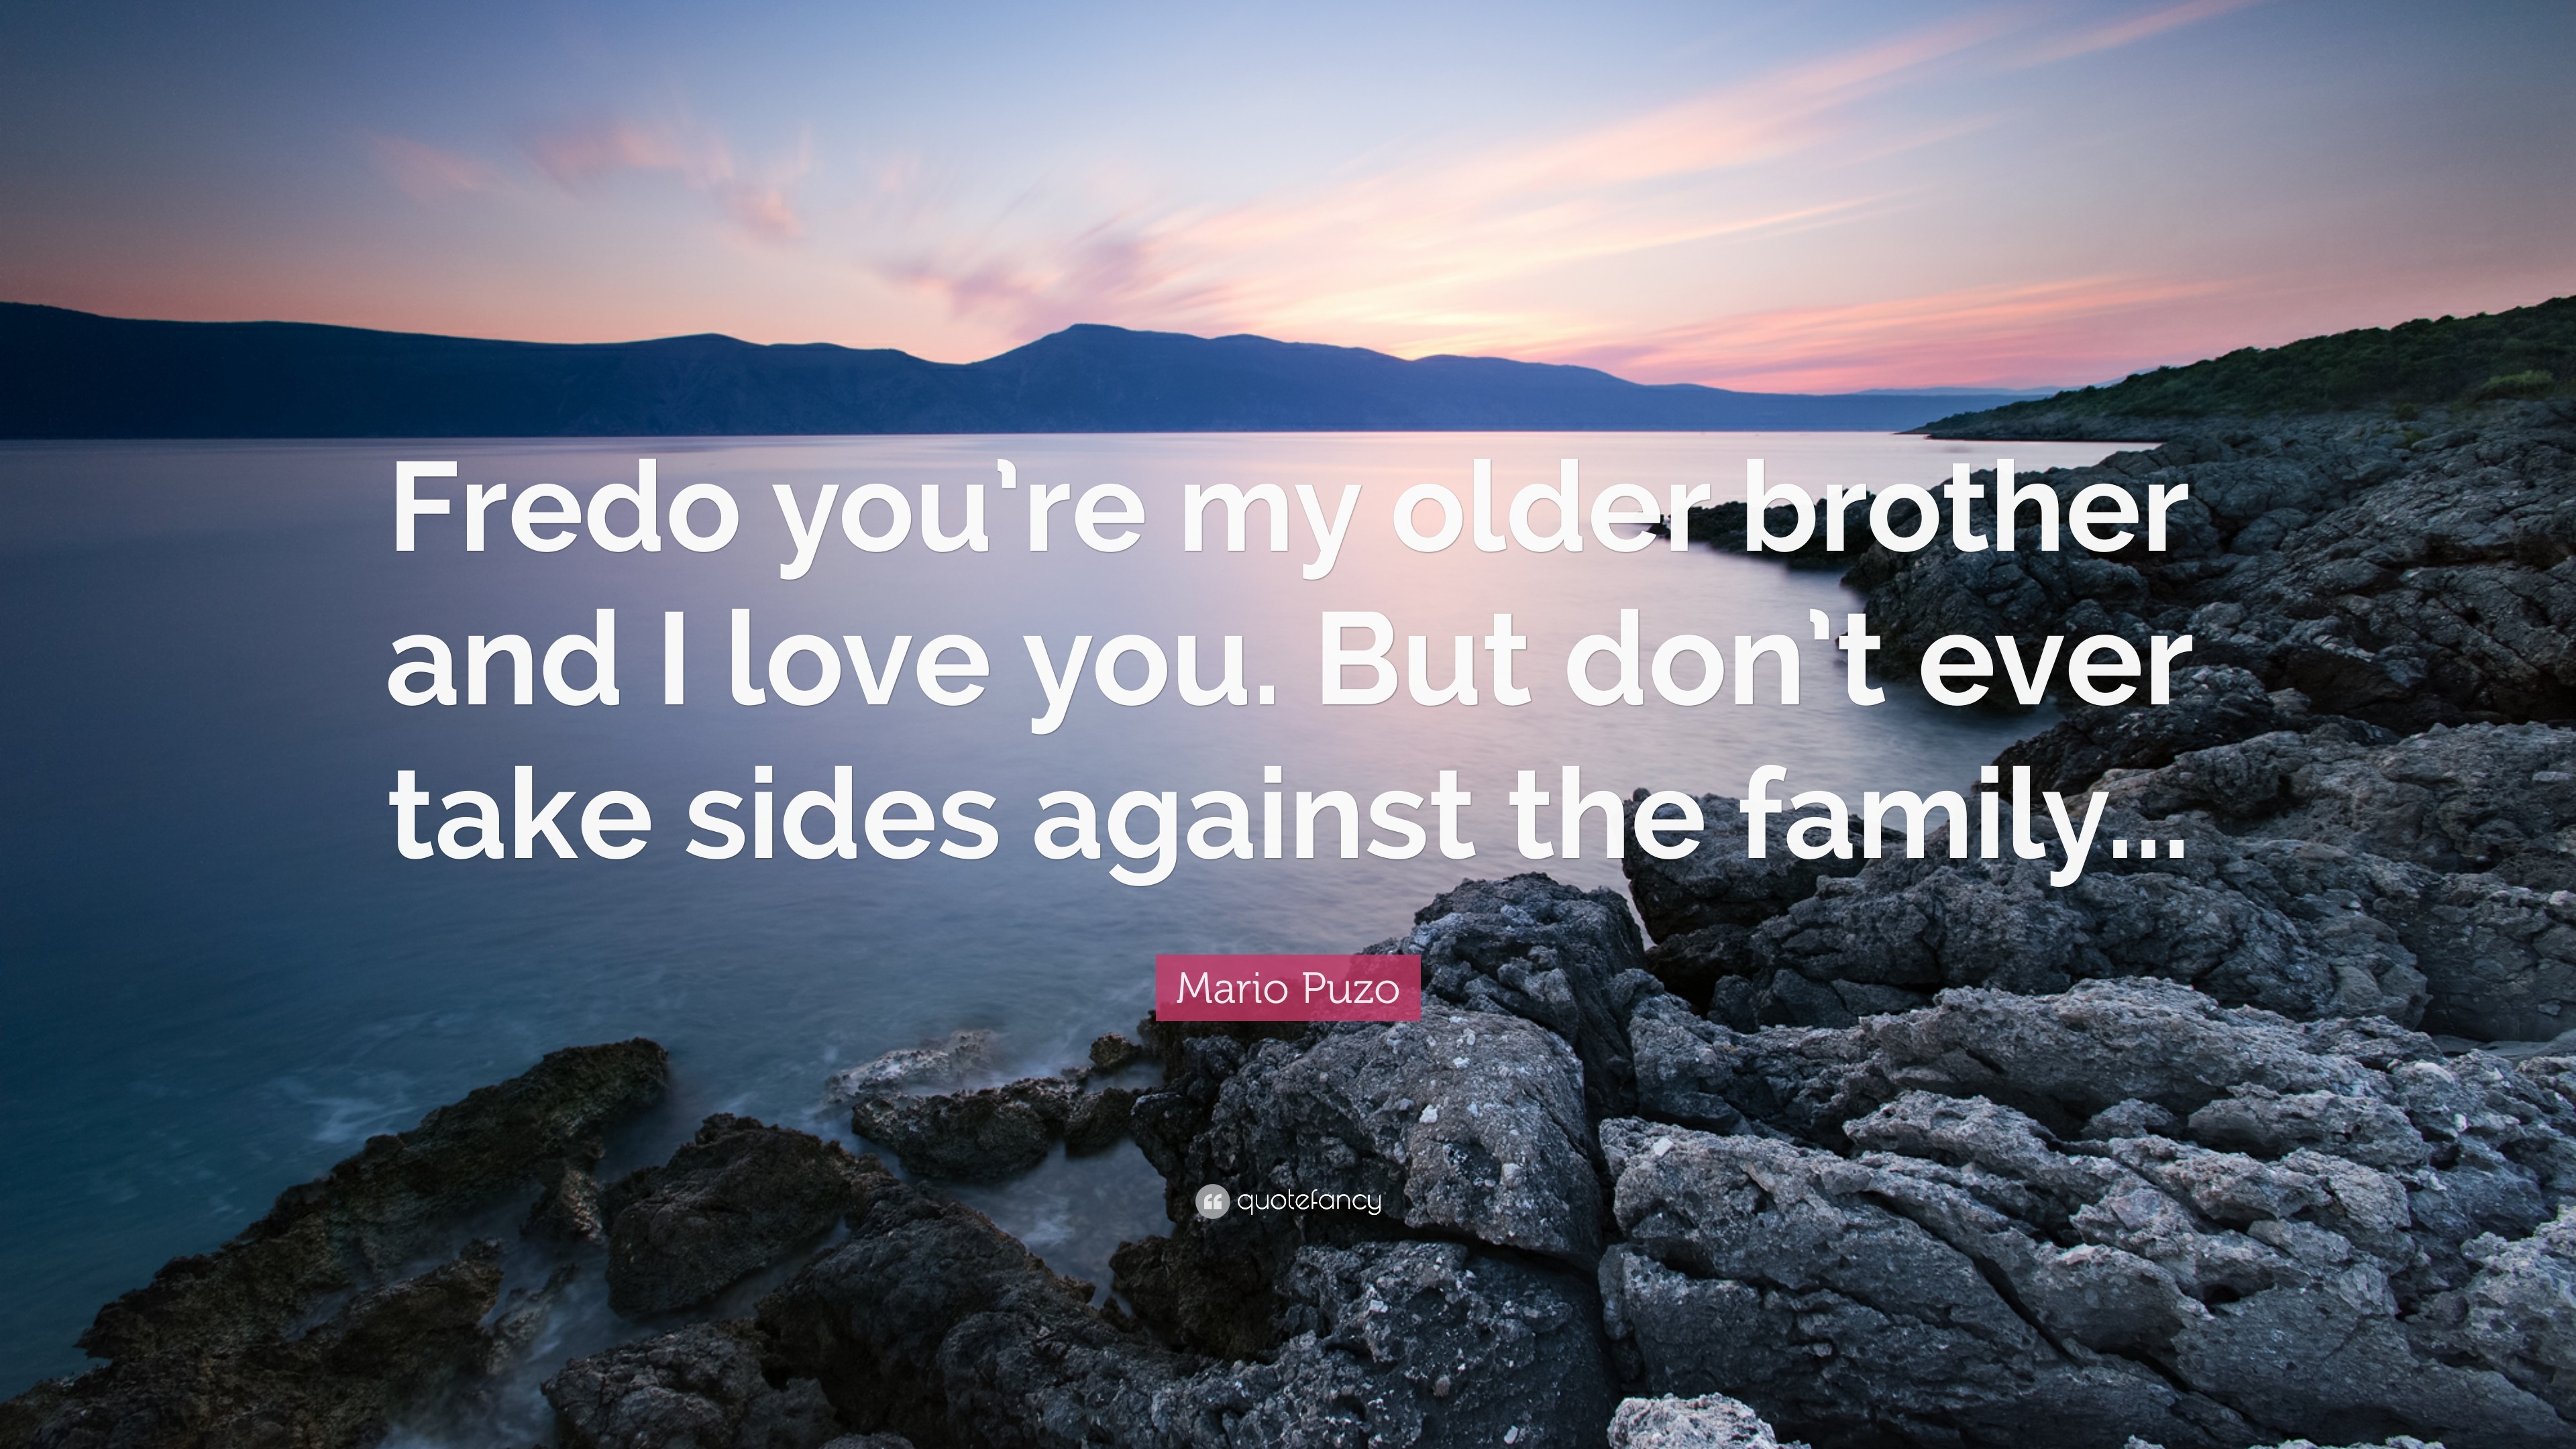 3840x2160 Mario Puzo Quote: “Fredo you're my older brother and I love you